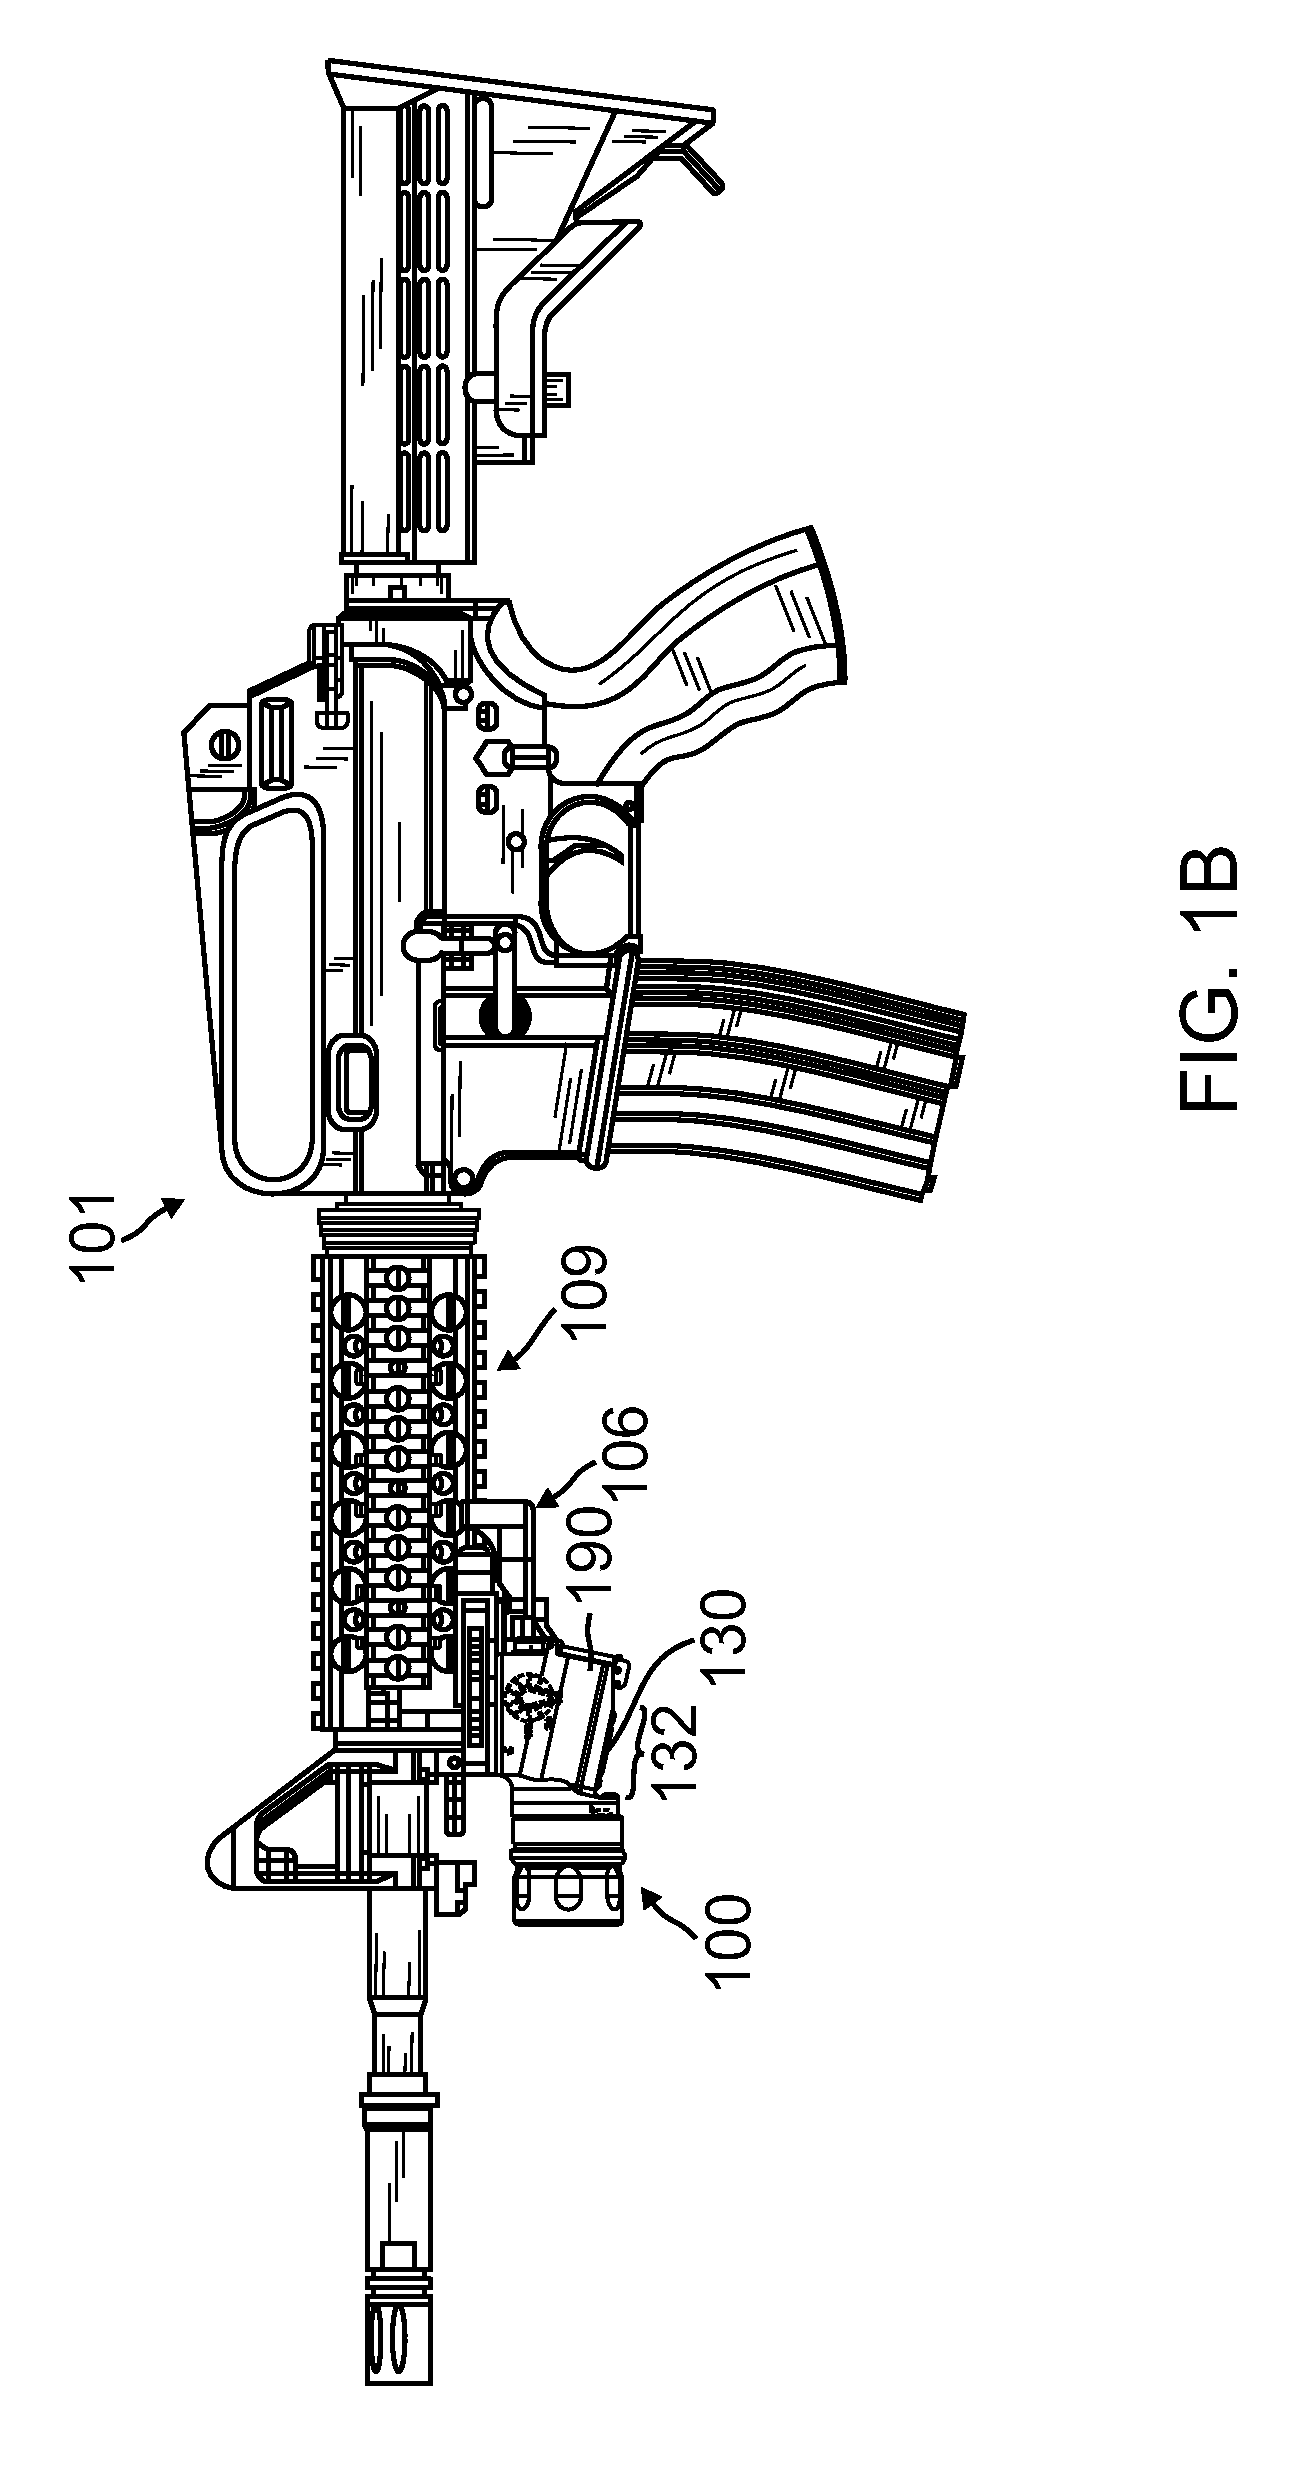 Lighting device with switchable light sources